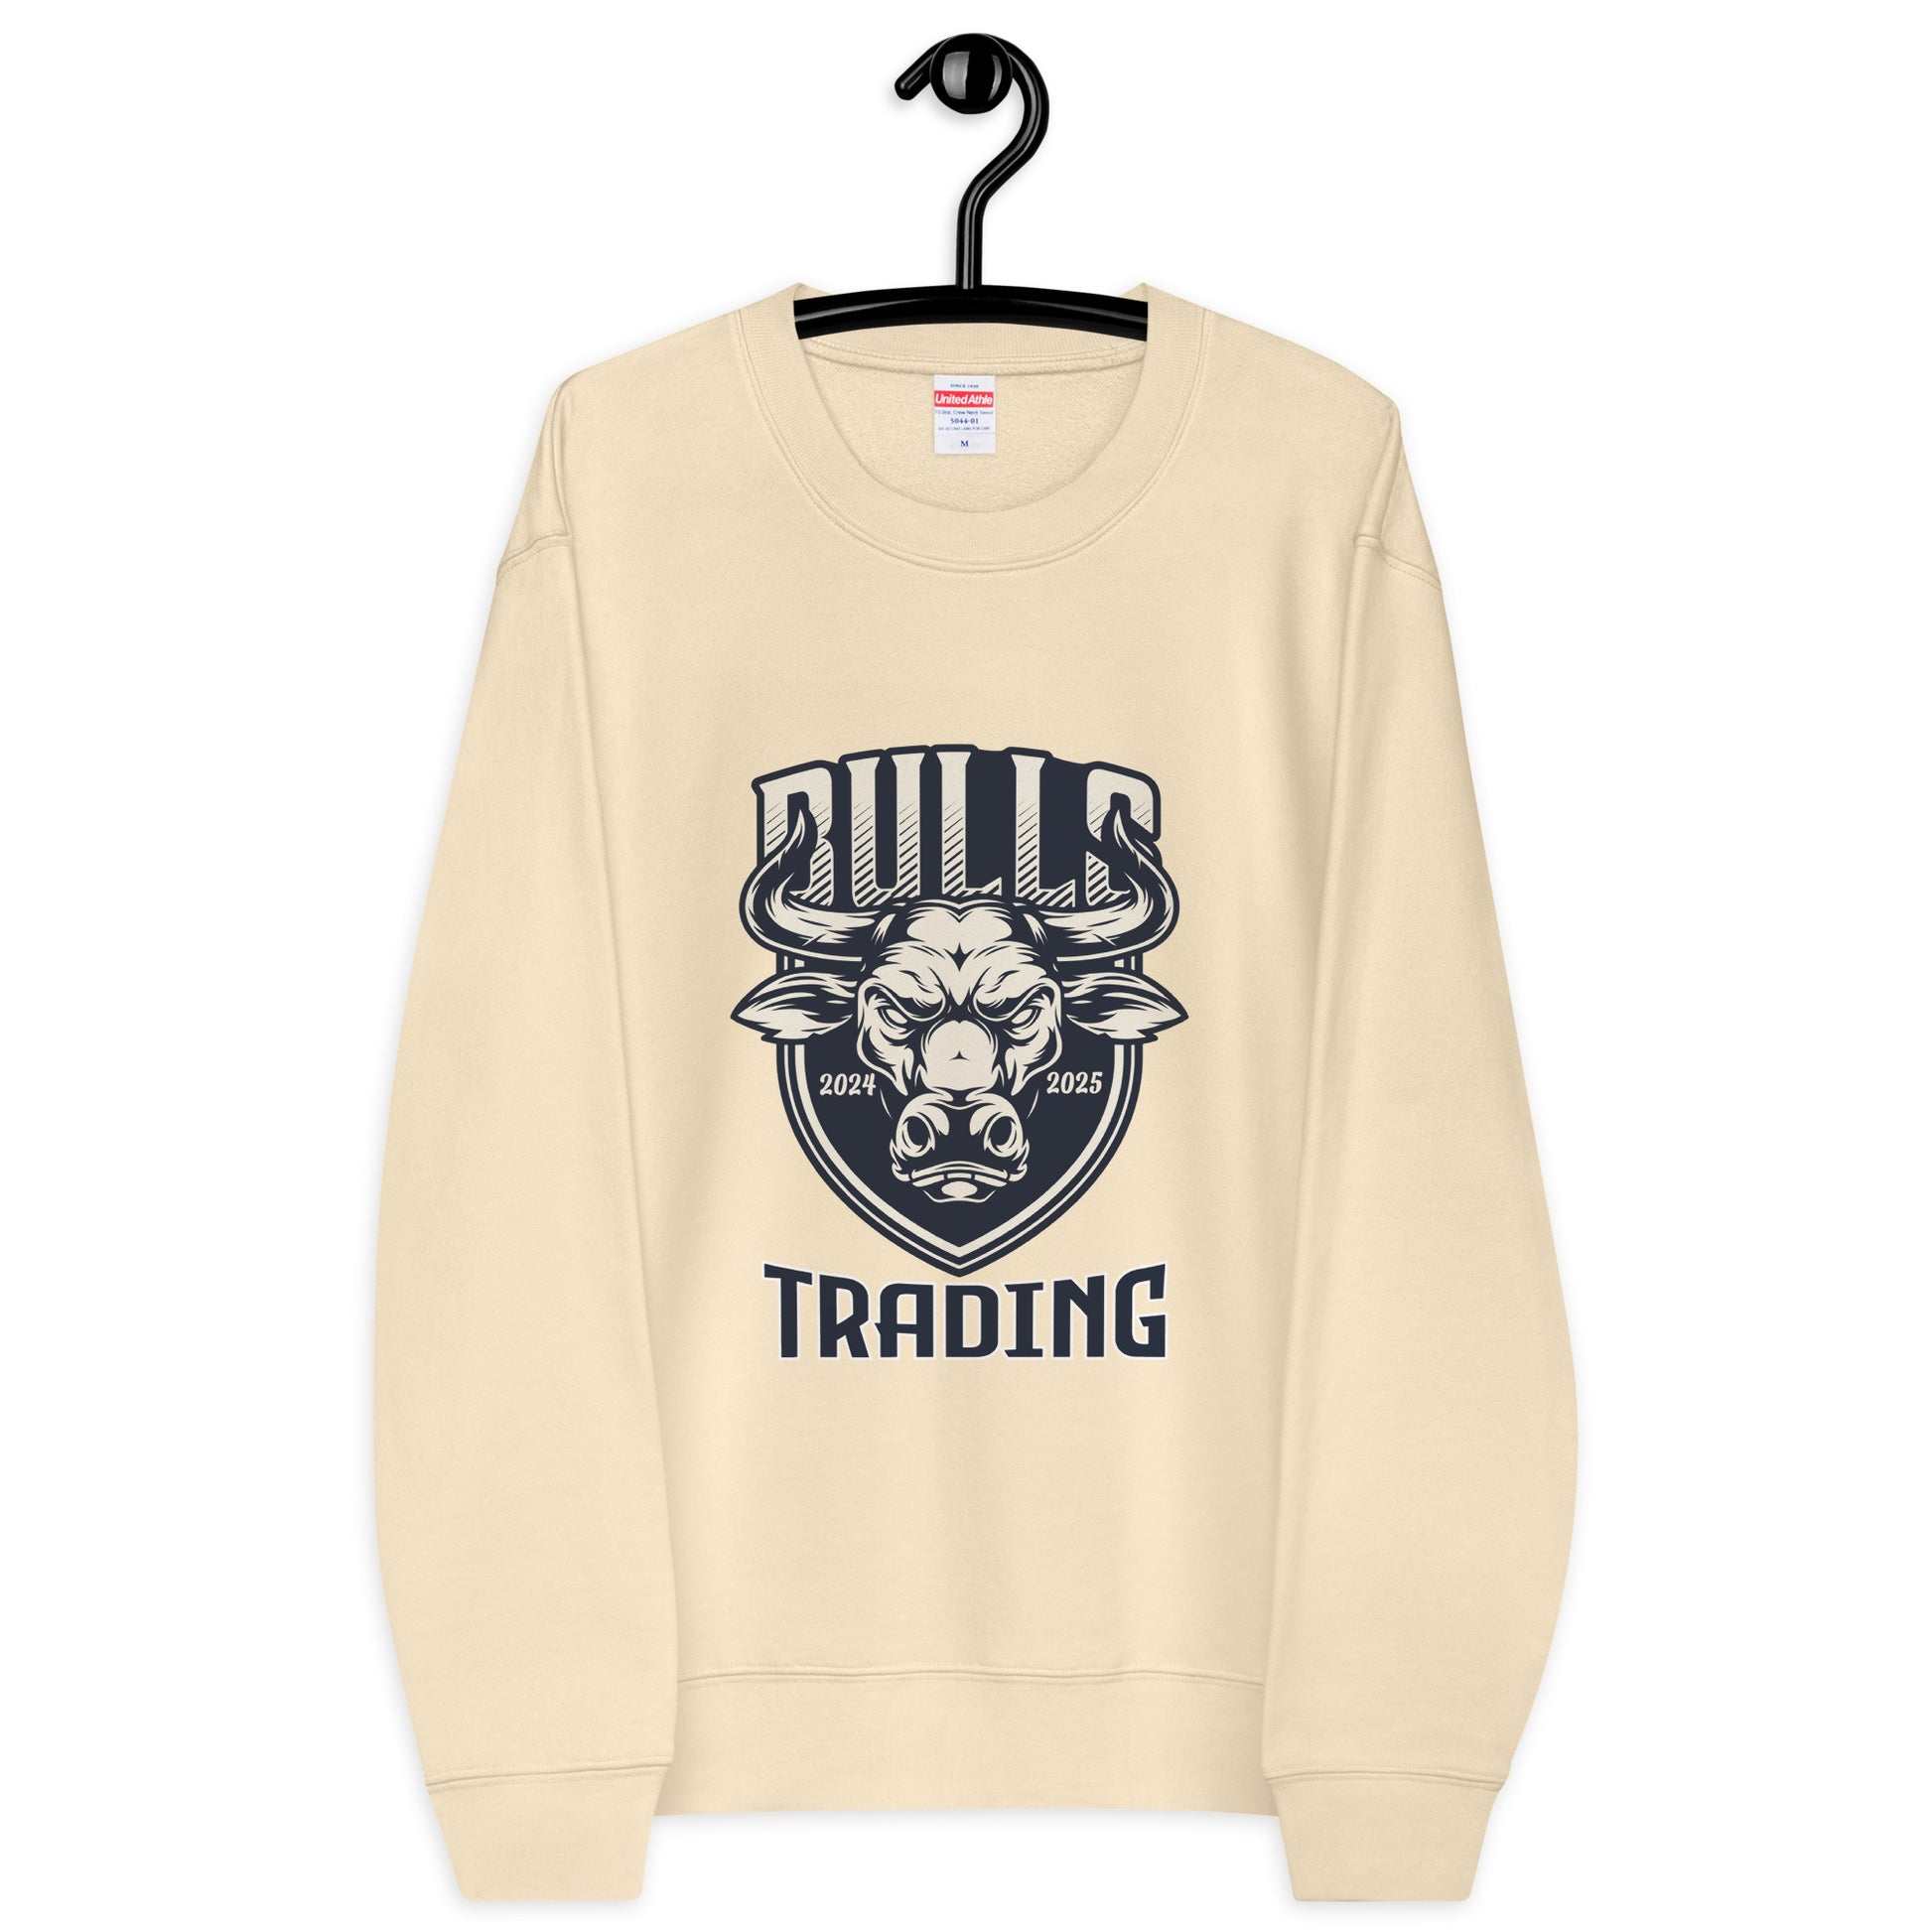 Niccie's Cozy Comfort & Style for Bulls Trading, Unisex French Terry Sweatshirt